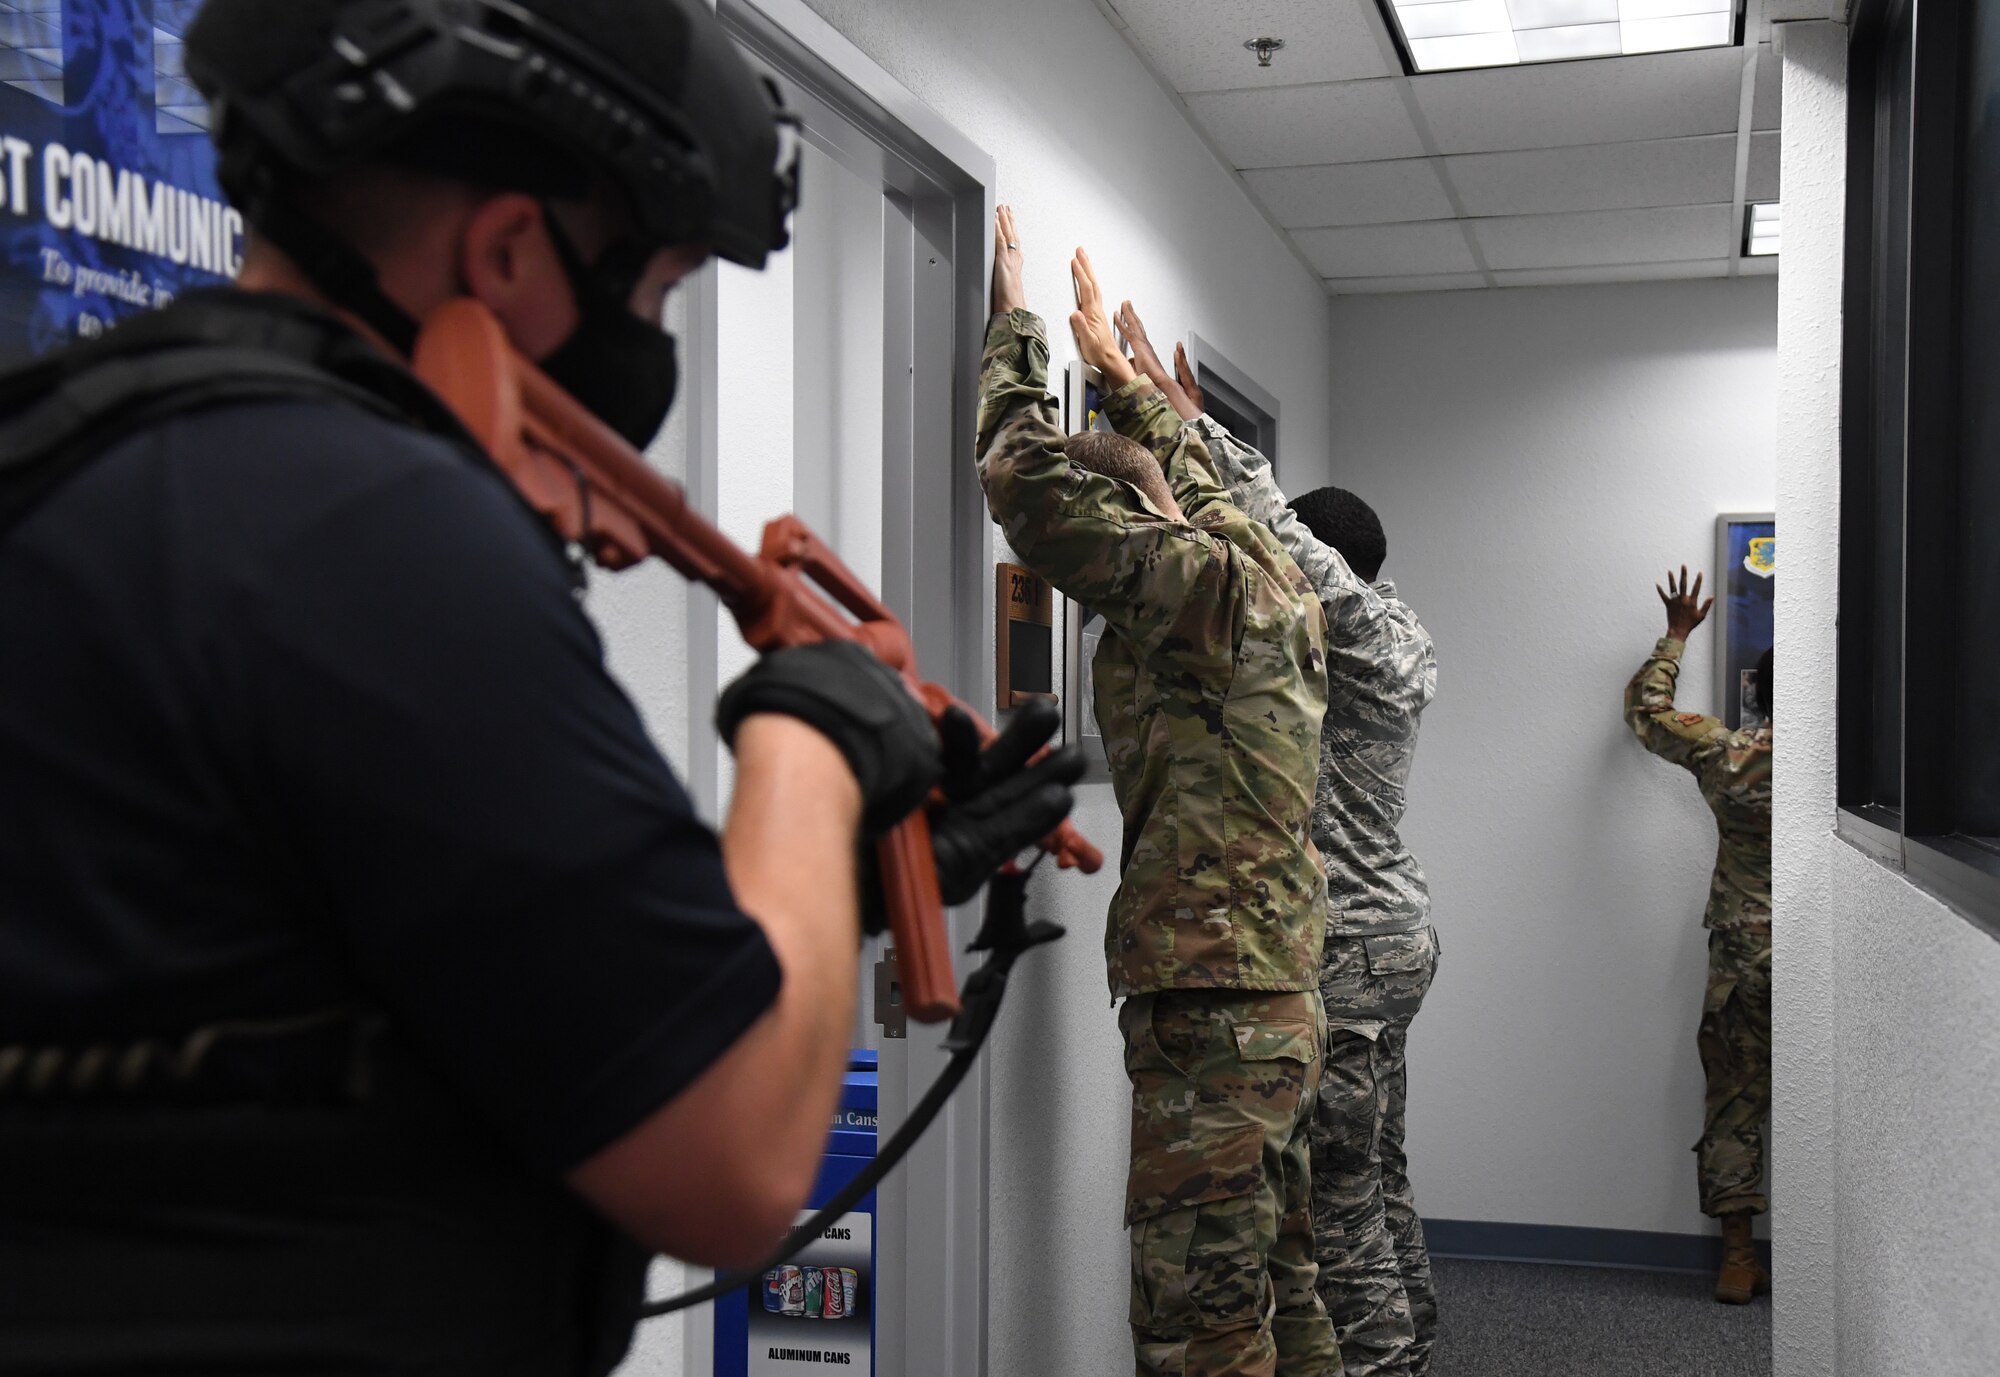 Tyler Sudduth, 81st Security Forces Squadron police officer, secures the 81st Mission Support Group command section inside the Sablich Center during an active shooter exercise at Keesler Air Force Base, Mississippi, Aug. 20, 2020. The scenario included two active duty Air Force members who simulated opening fire inside the Sablich Center in order to test the base's ability to respond to and recover from a mass casualty event. (U.S. Air Force photo by Kemberly Groue)